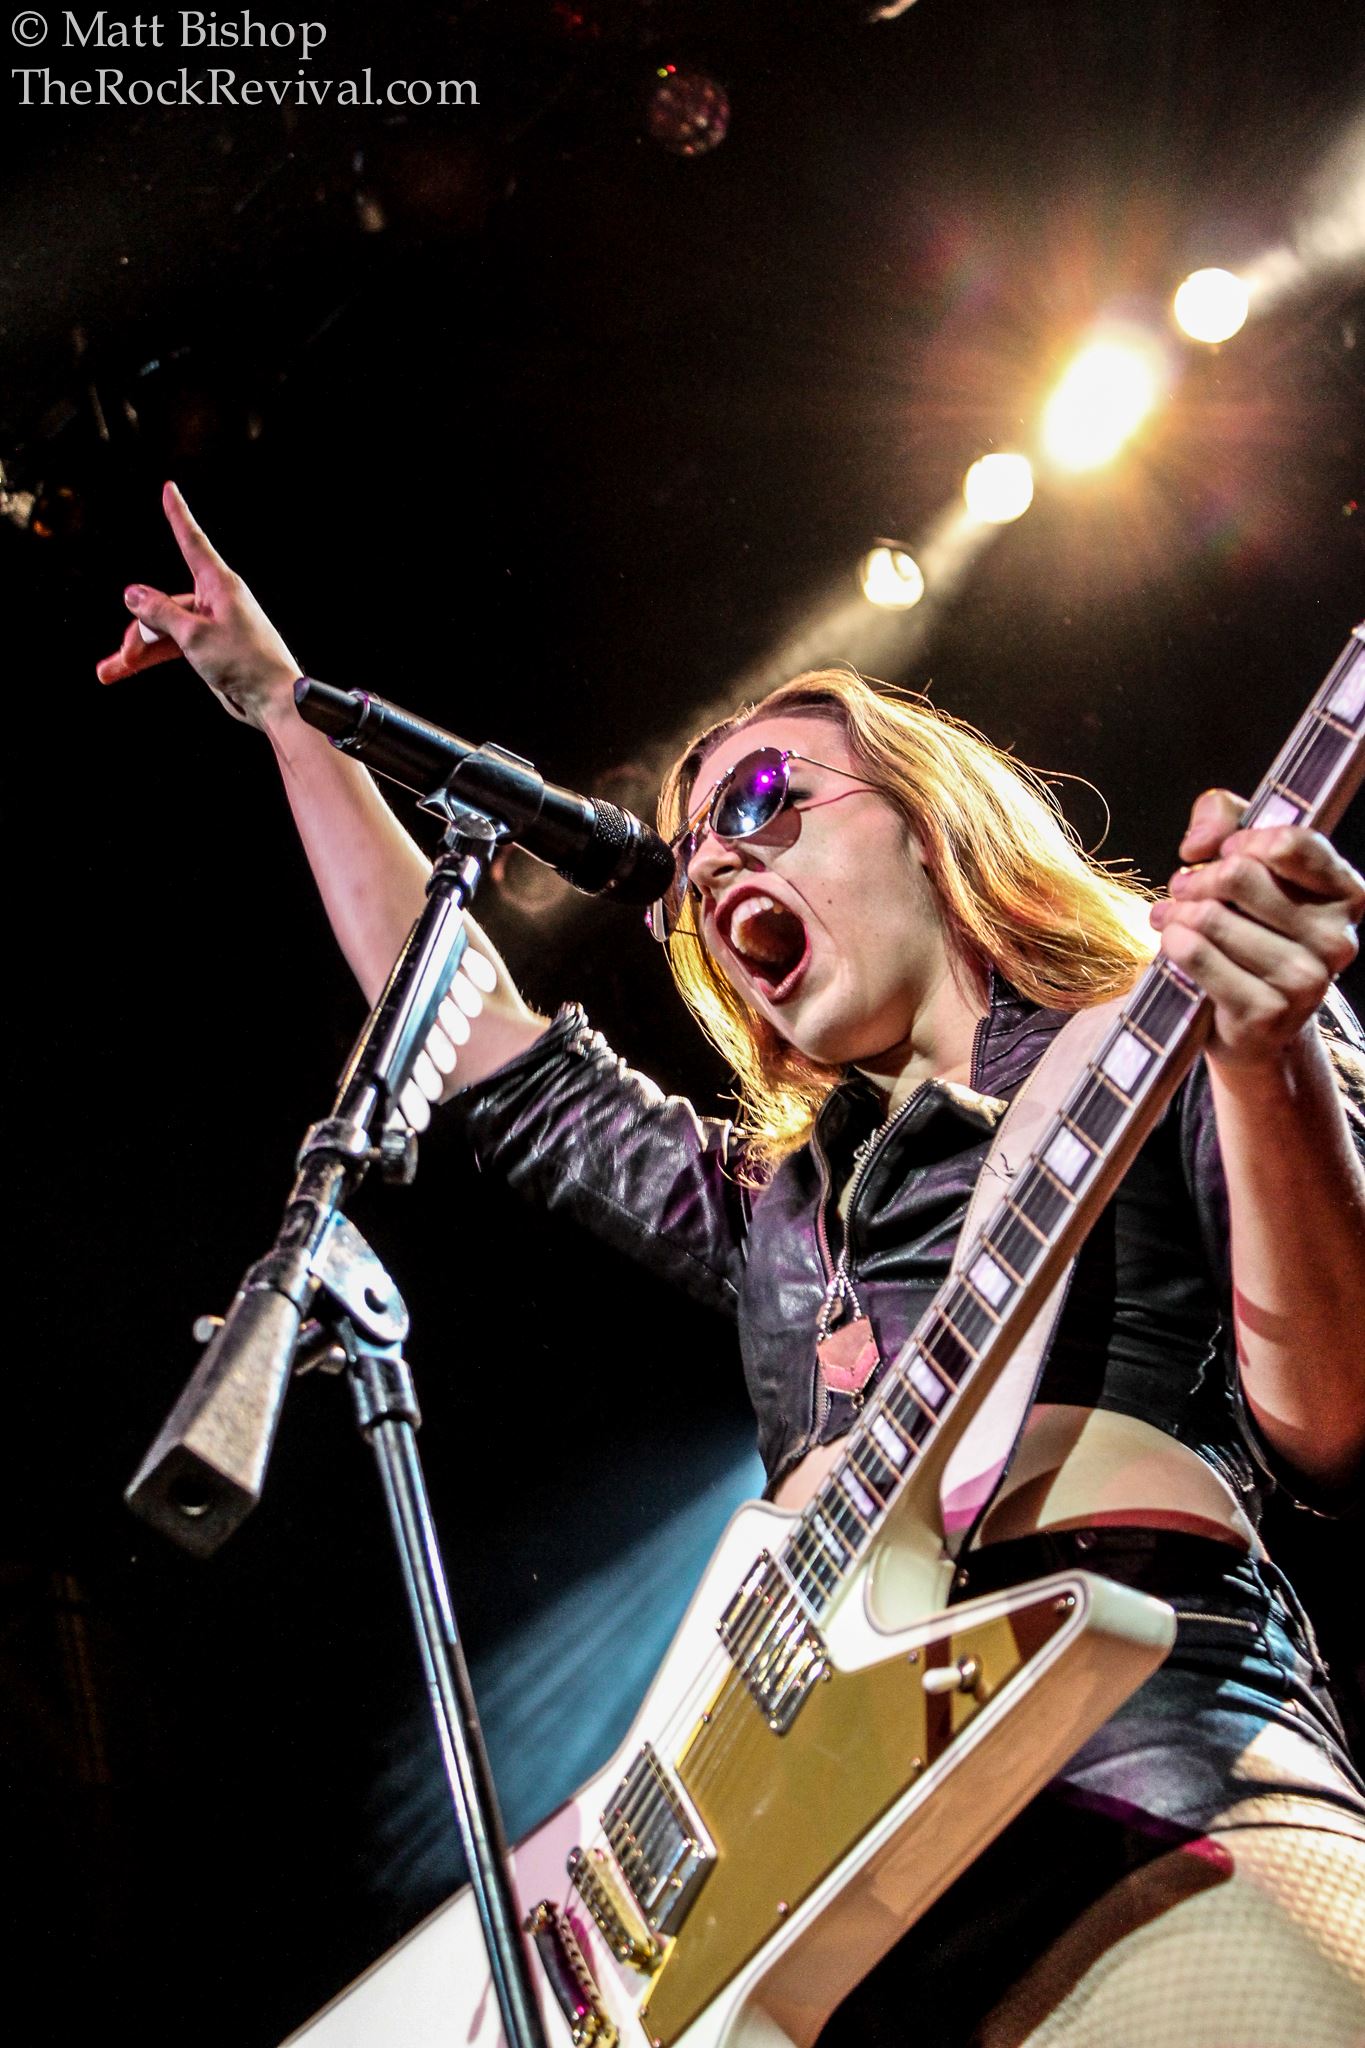 HALESTORM PREMIERE NEW MUSIC VIDEO FOR “MZ. HYDE”